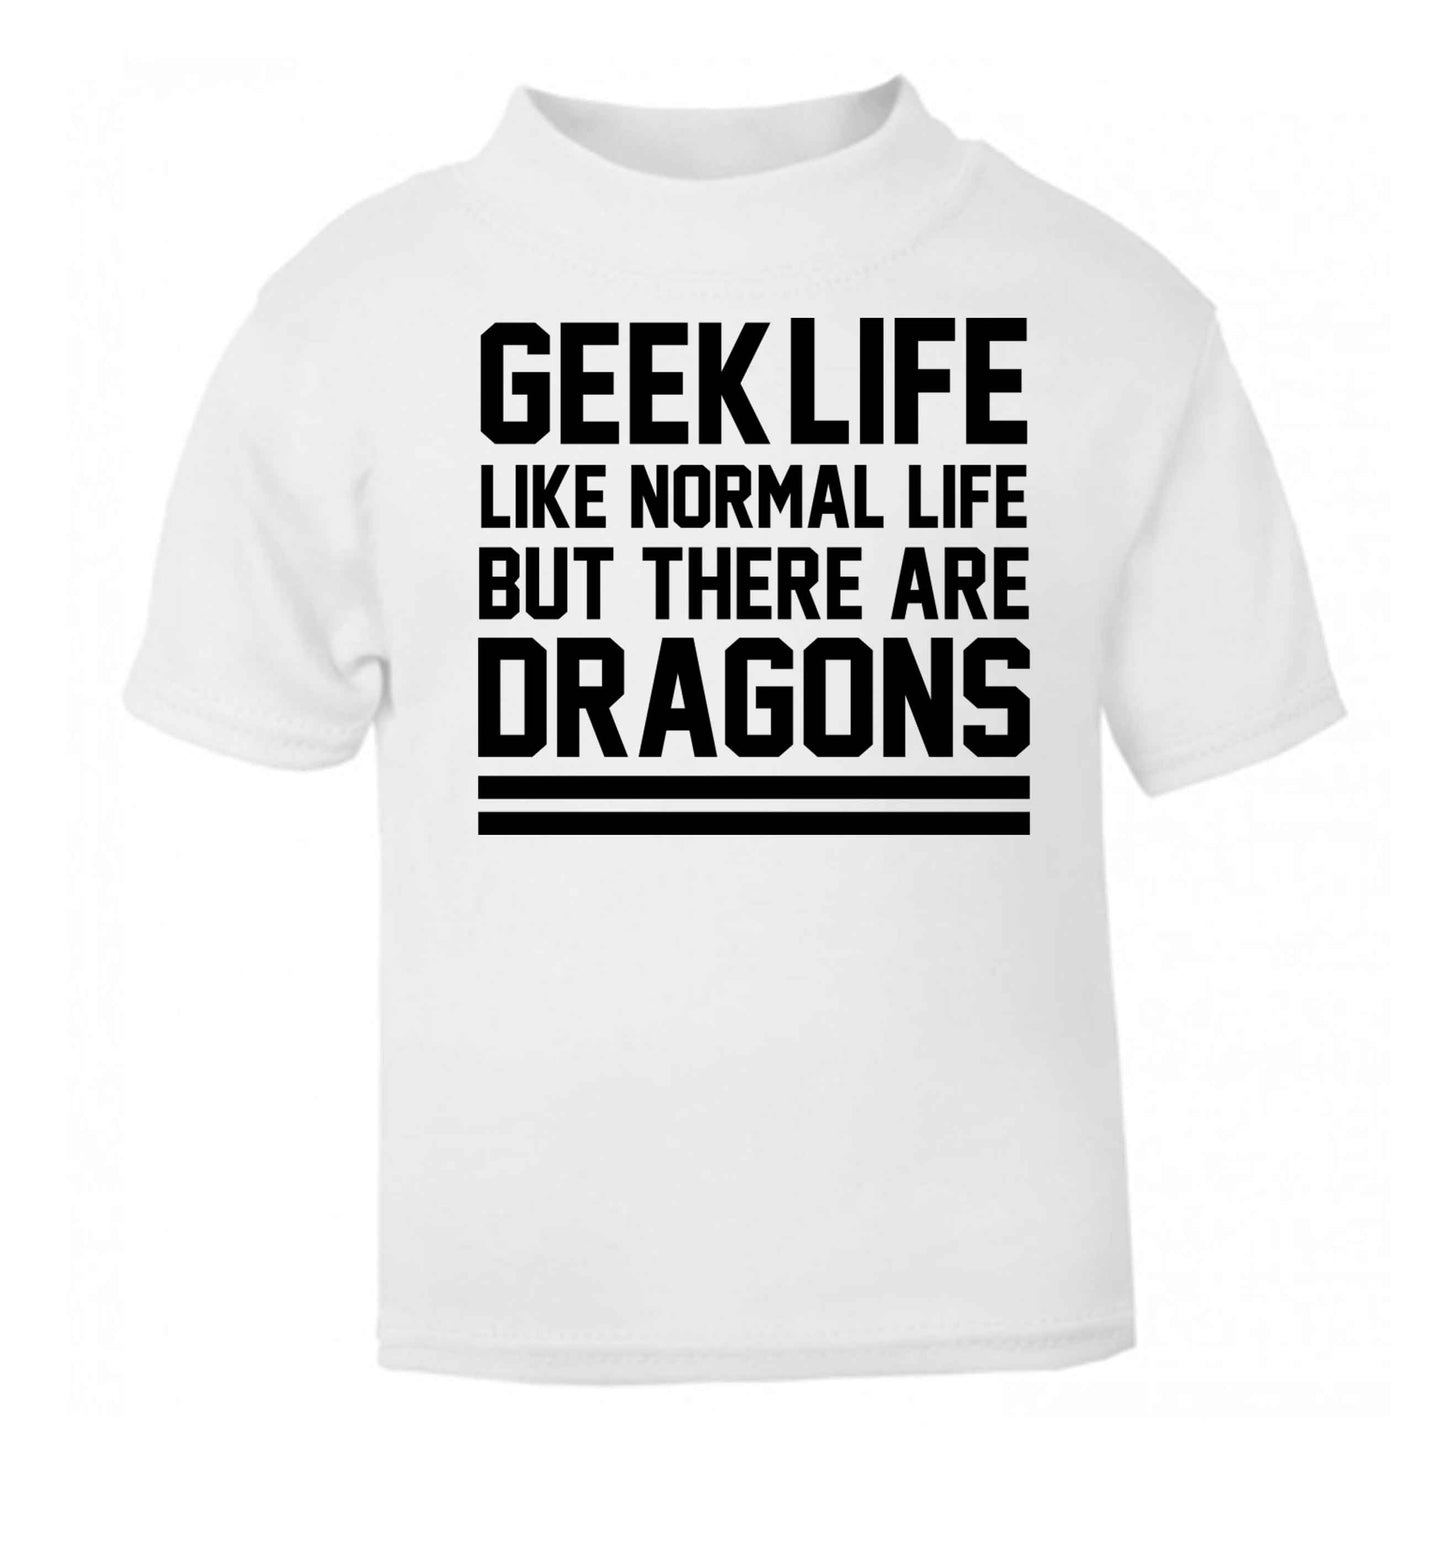 Geek life like normal life but there are dragons white baby toddler Tshirt 2 Years